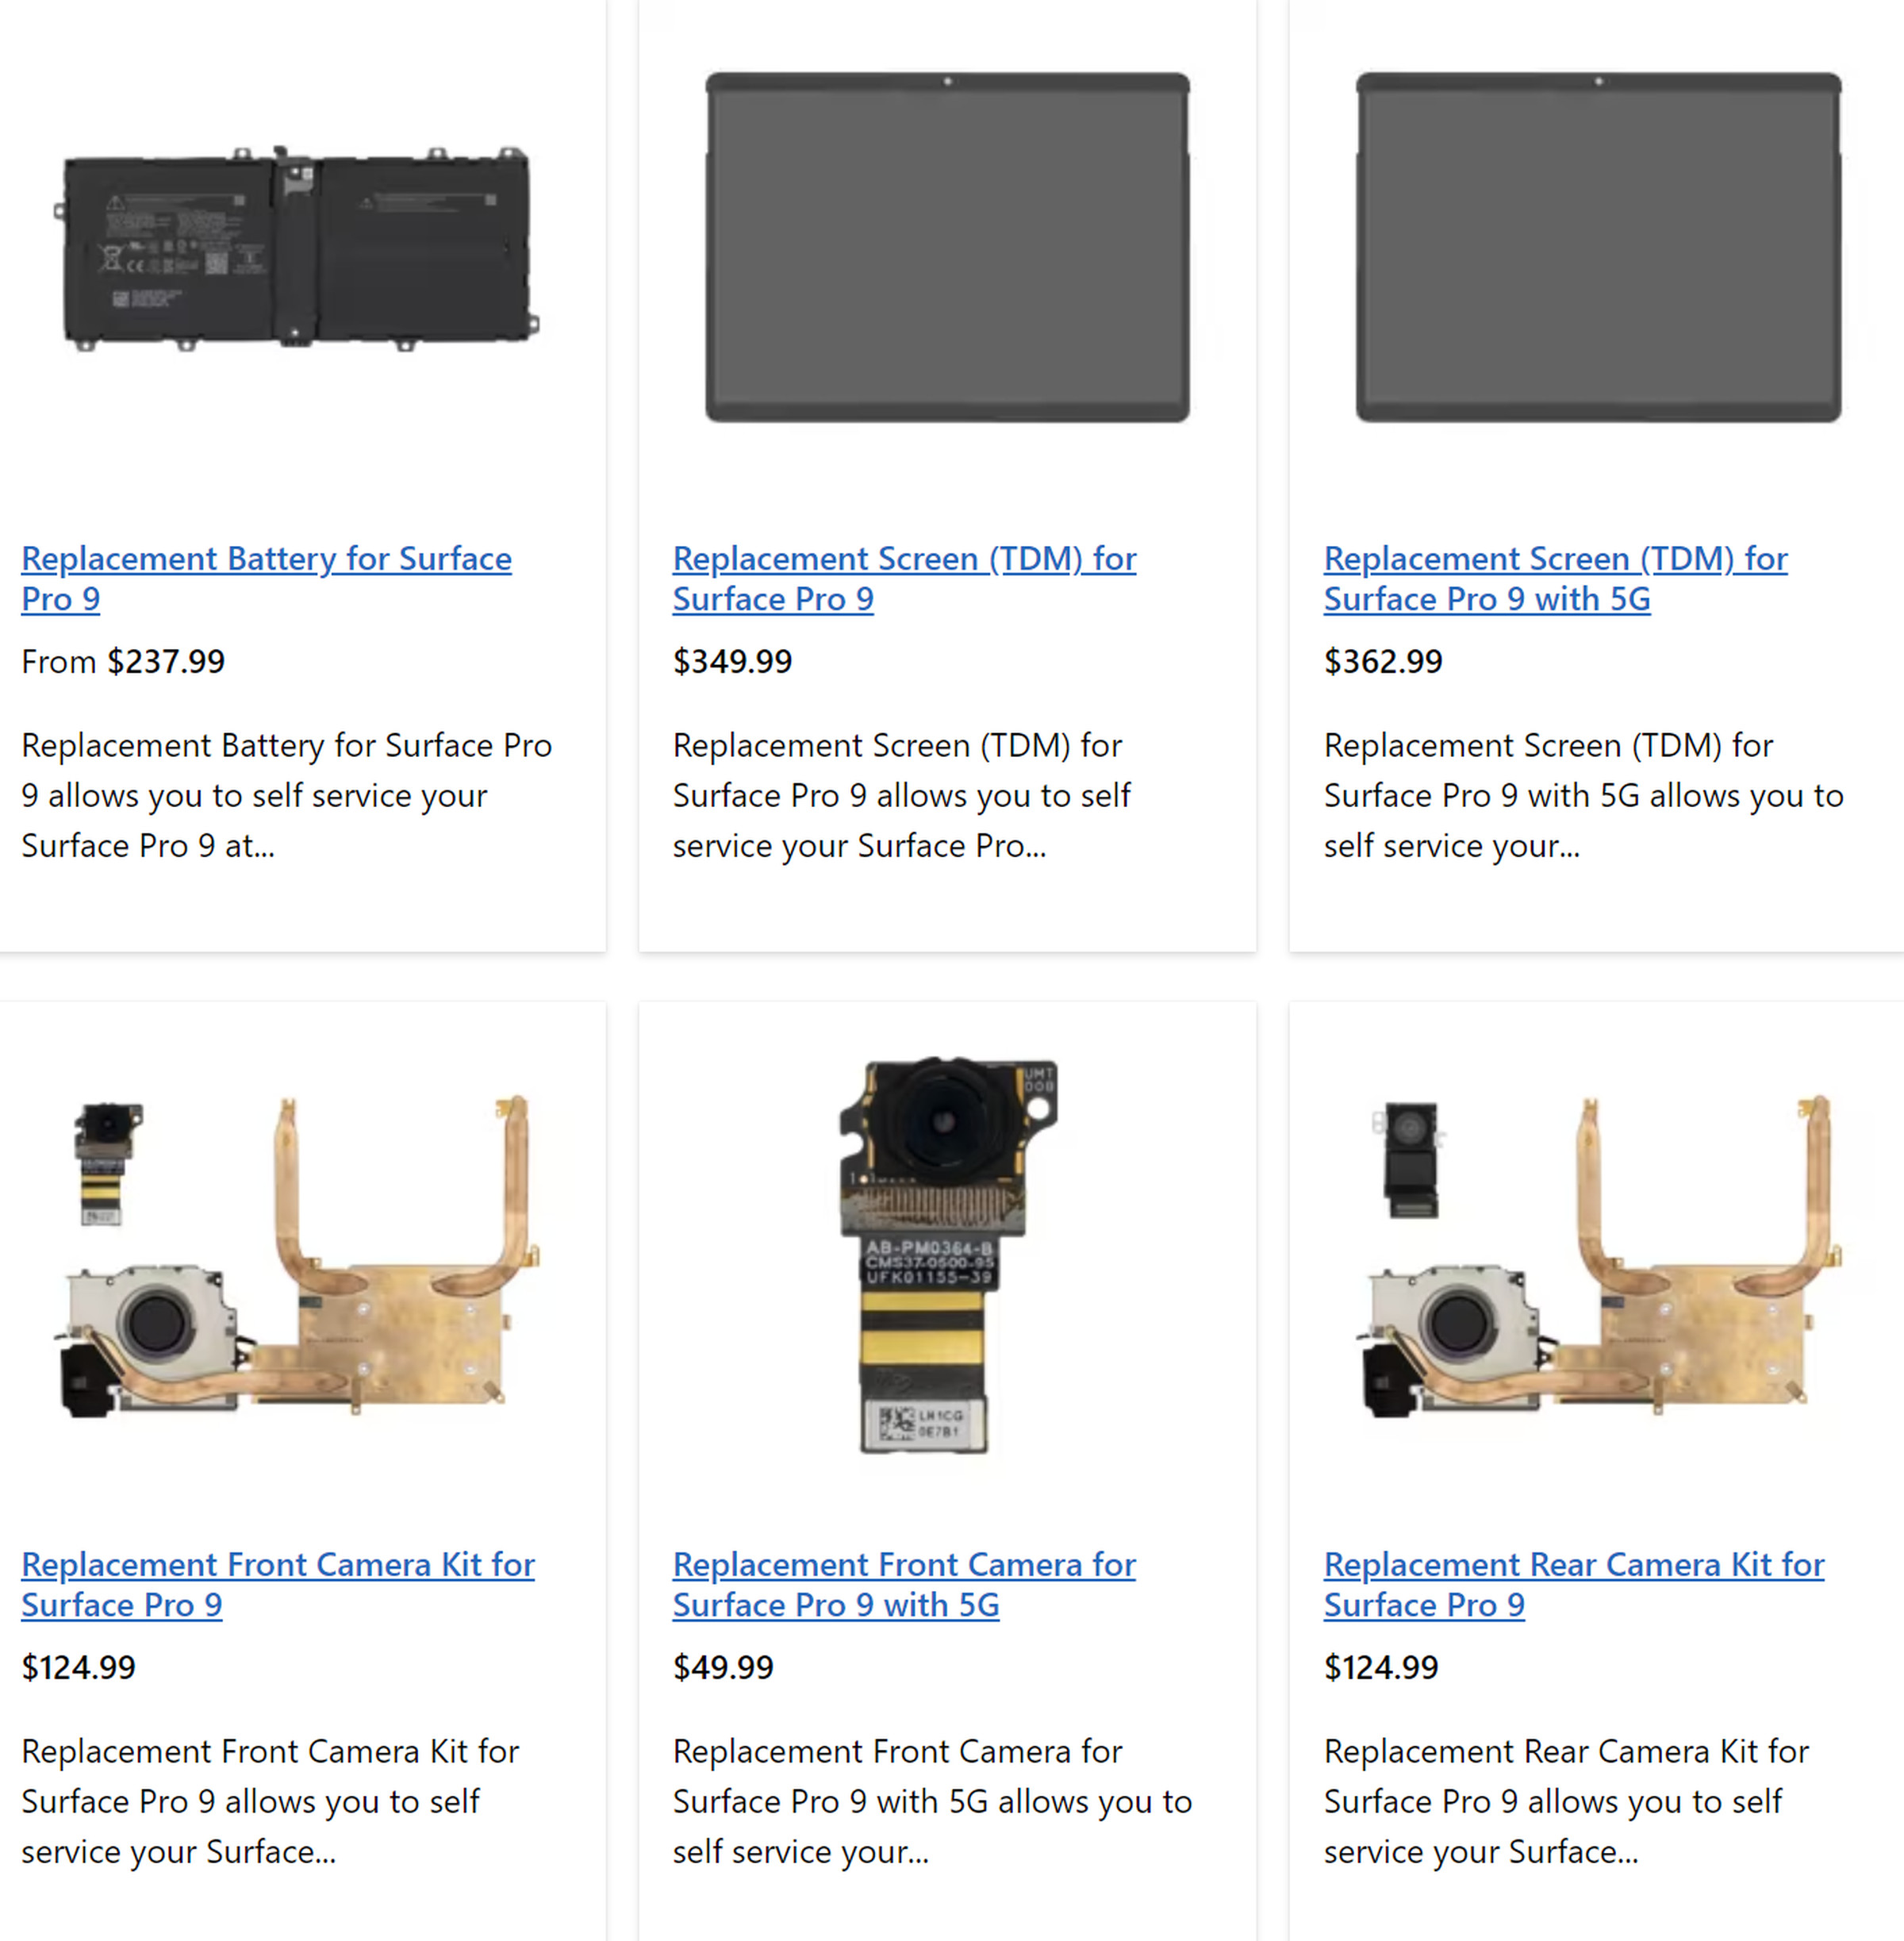 Microsoft has a variety of Surface replacement components available.